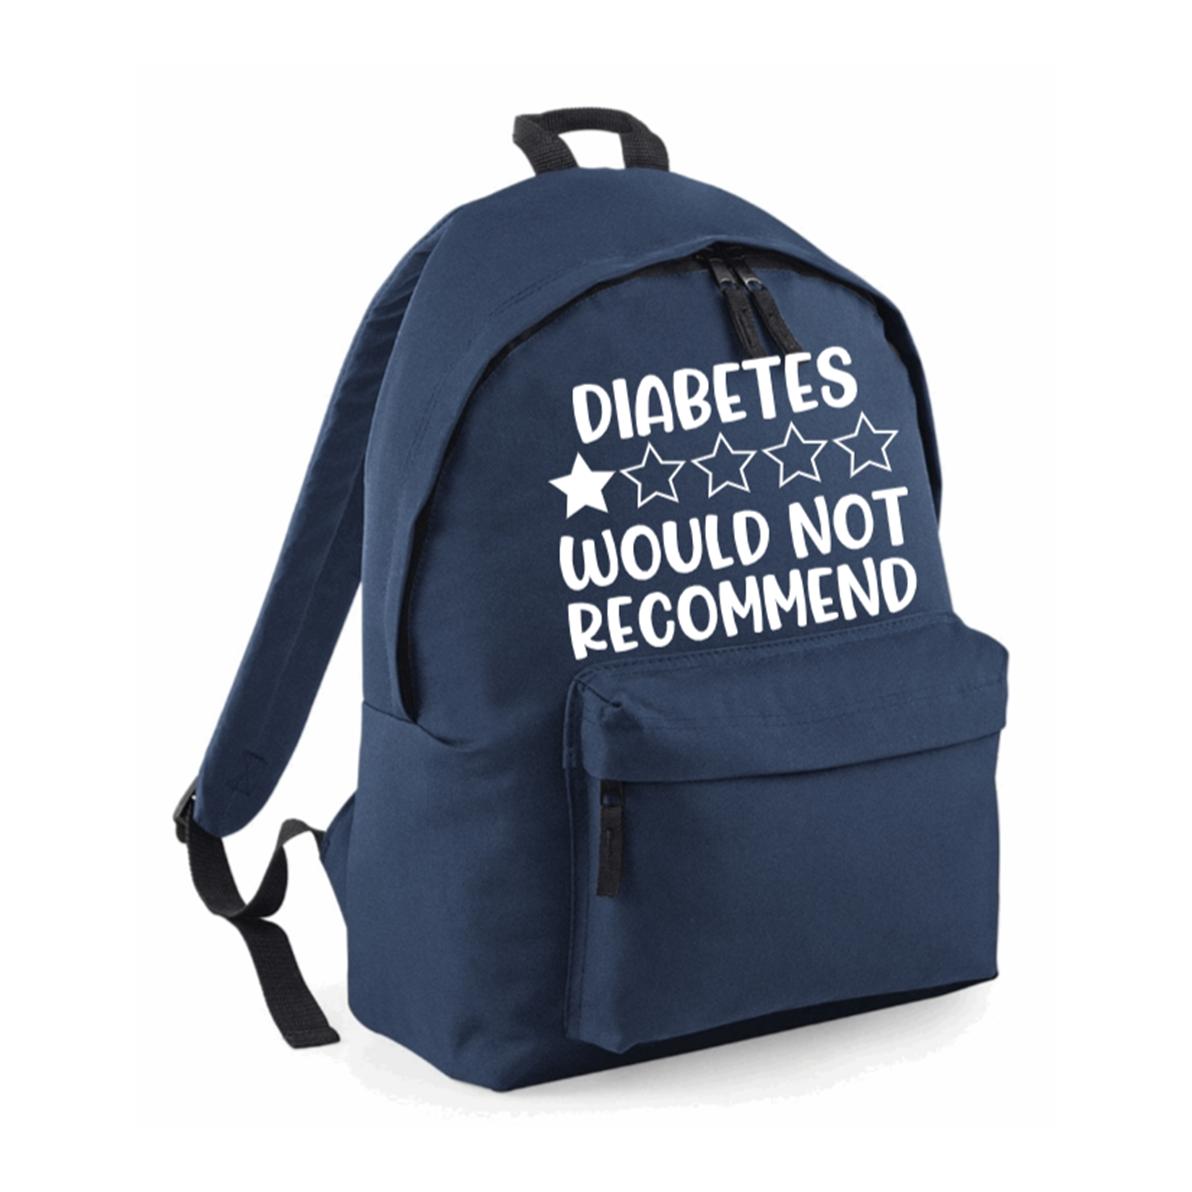 Diabetes * Would Not Recommend Backpack